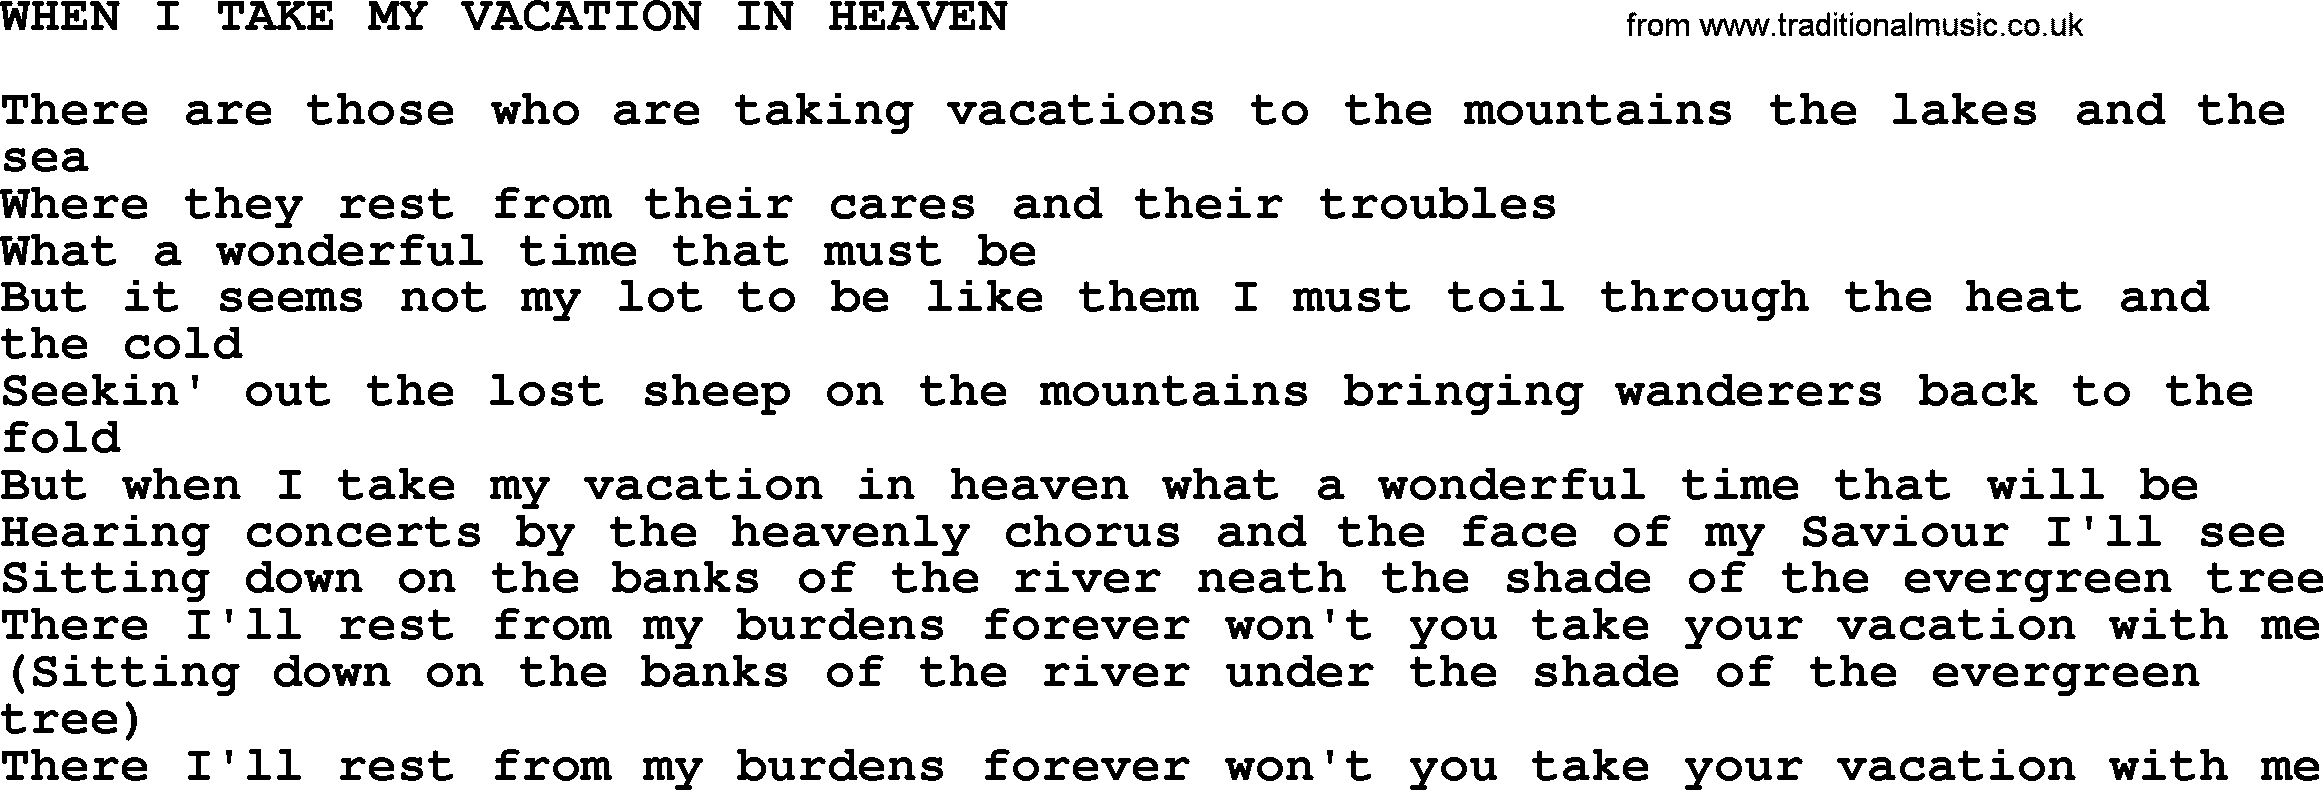 Johnny Cash song When I Take My Vacation In Heaven.txt lyrics